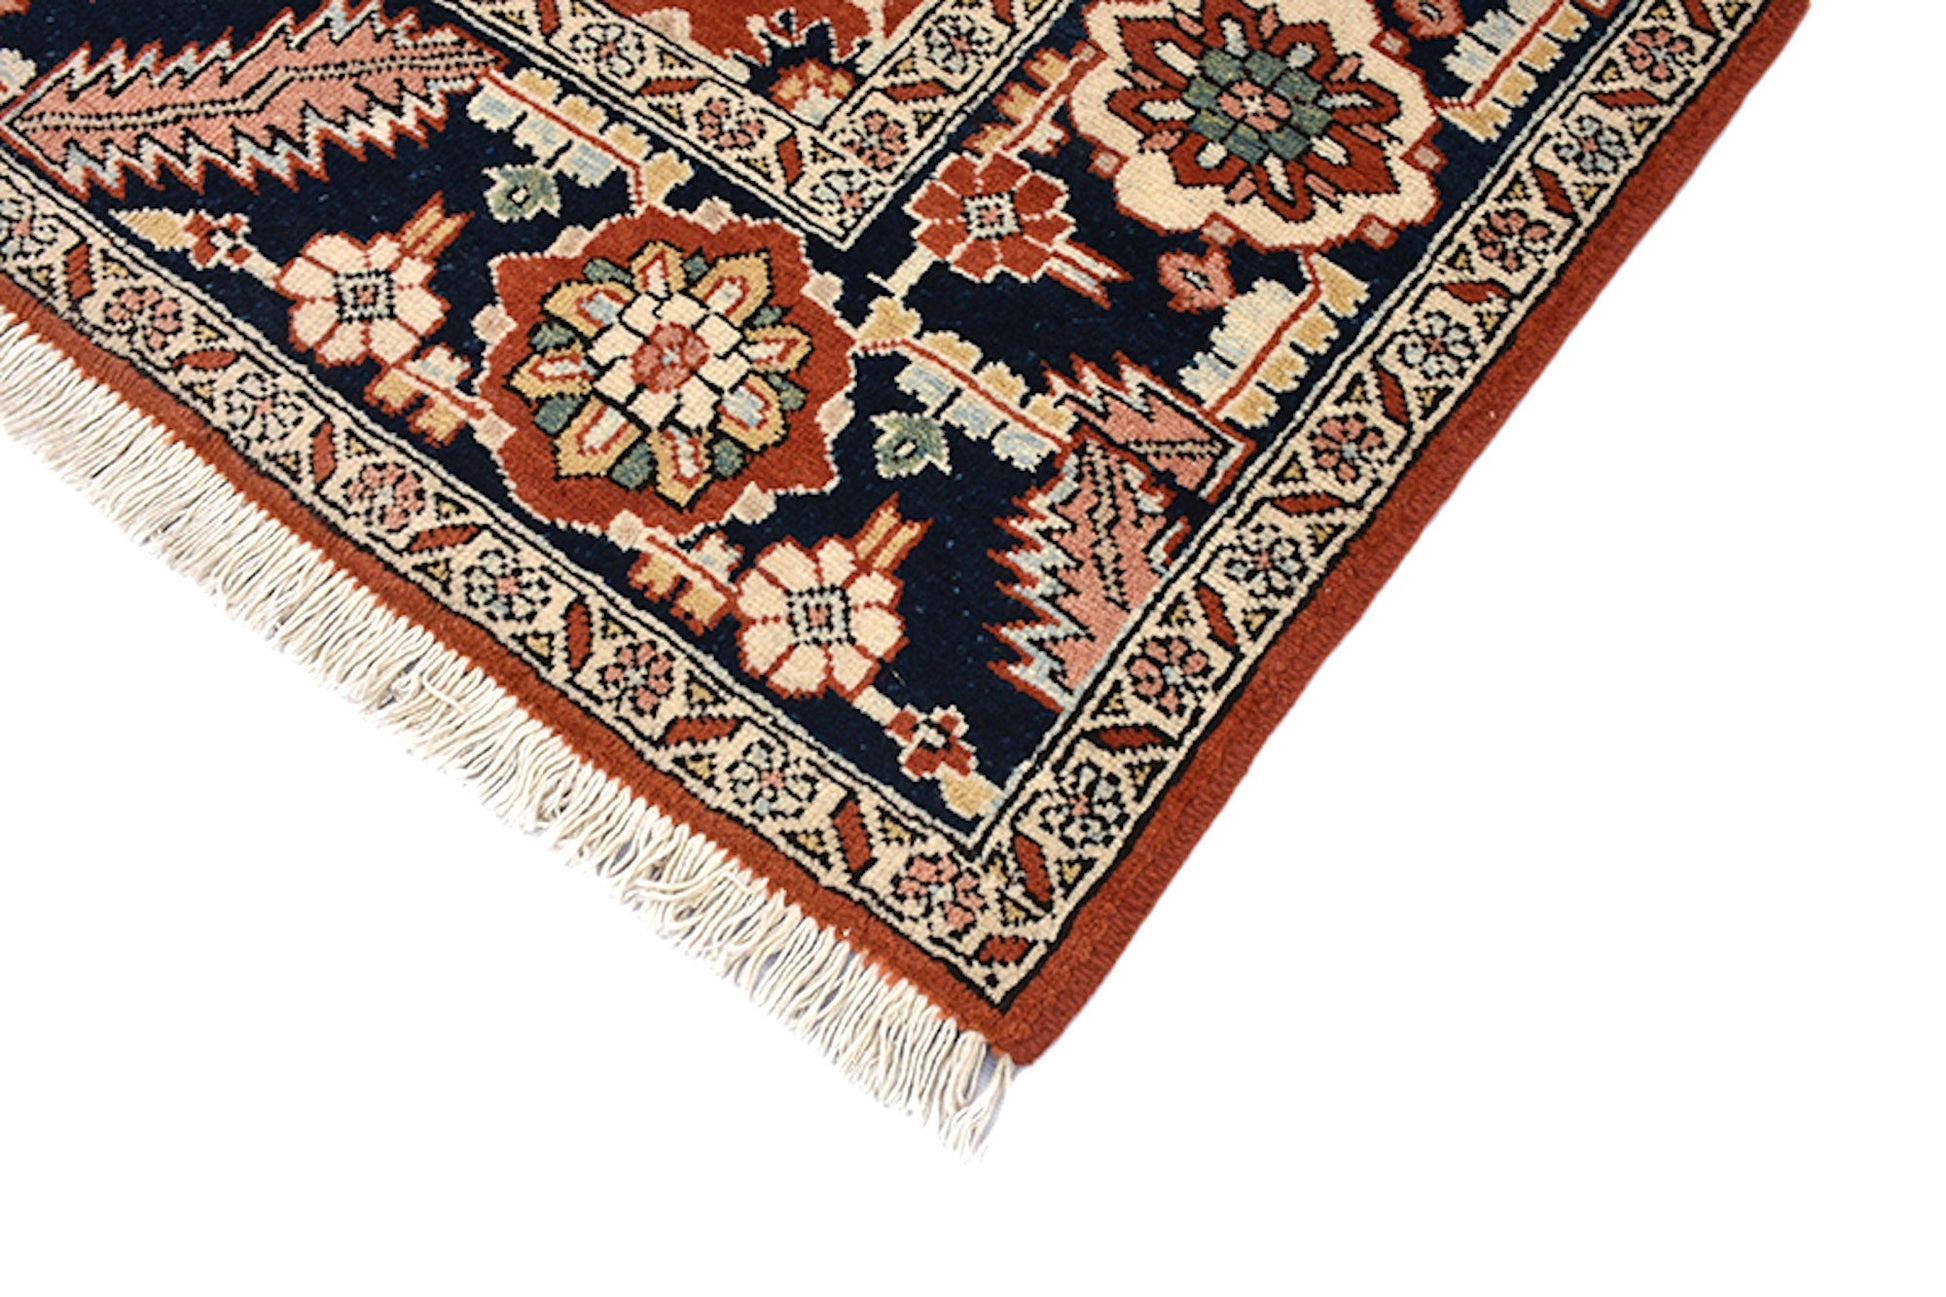 Orange Blue Oriental 6x8 Antique Rug | Accent One of a Kind Living Room Rug with Persian Motifs and Navy Blue Border